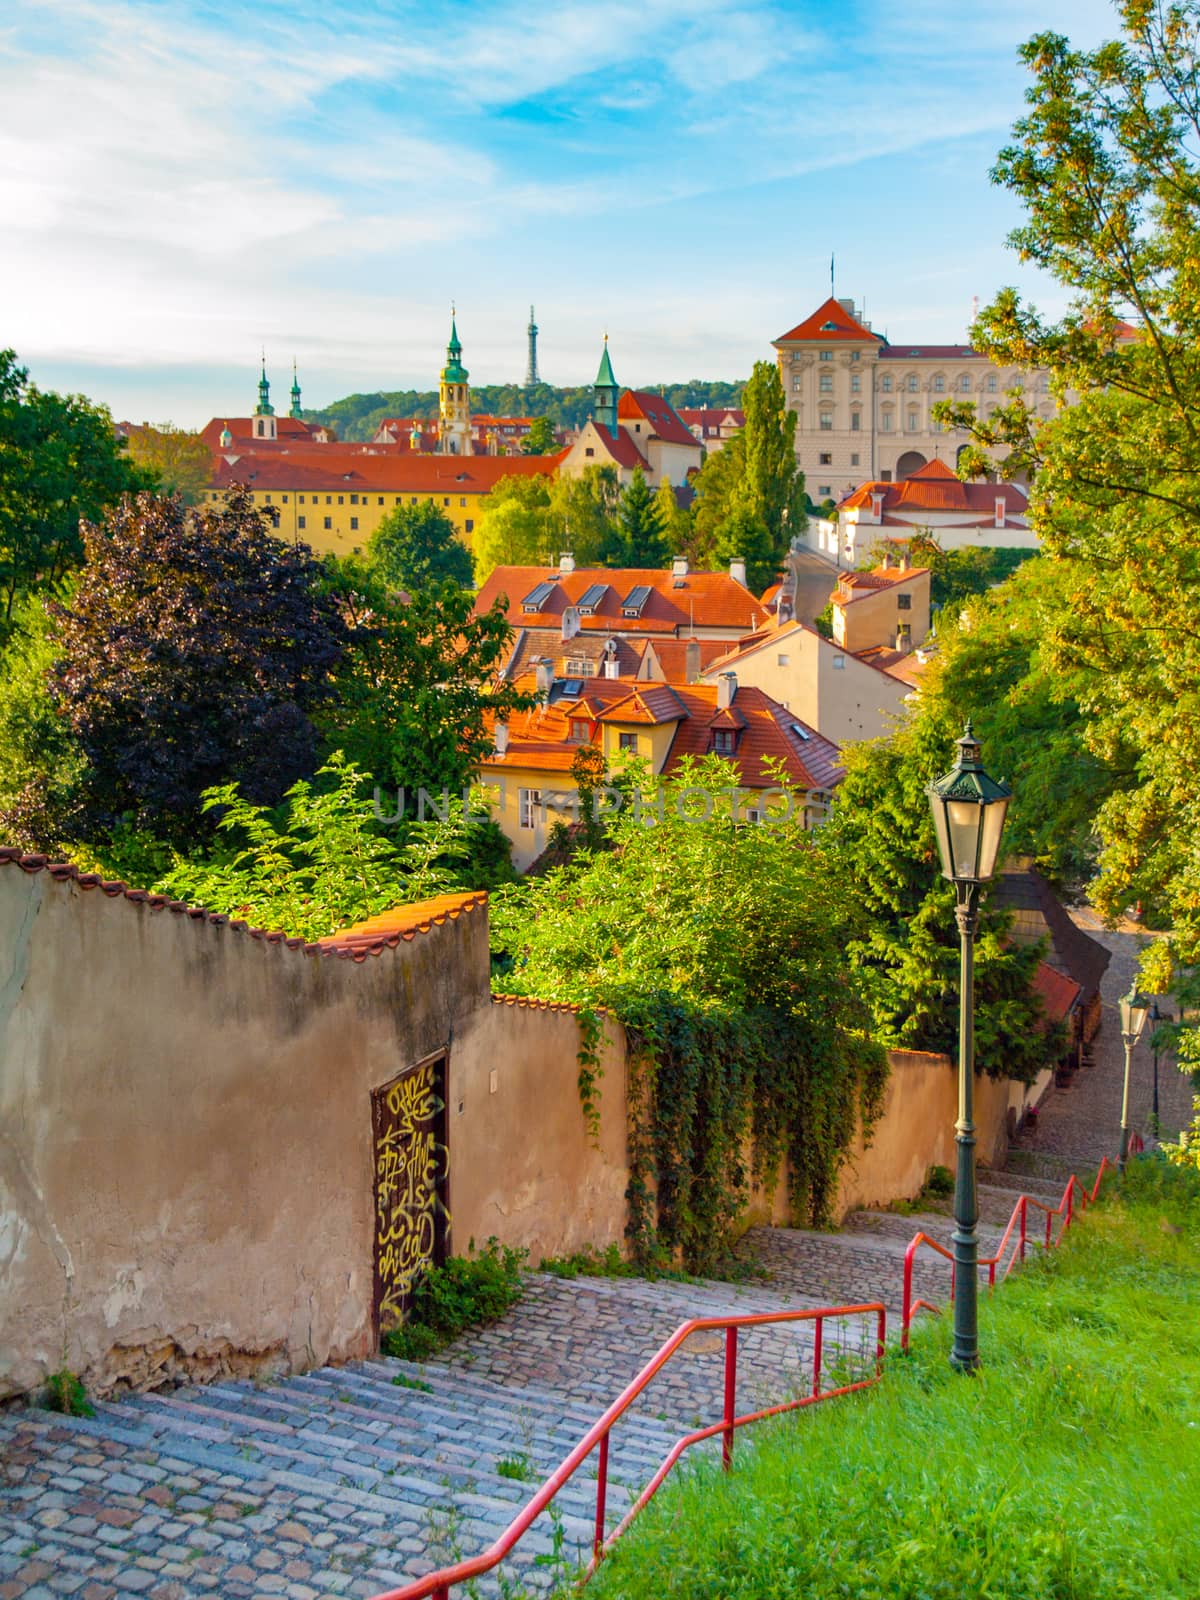 Old stairs leads to medieval district of Novy Svet, Hradcany, Prague, Czech Republic by pyty